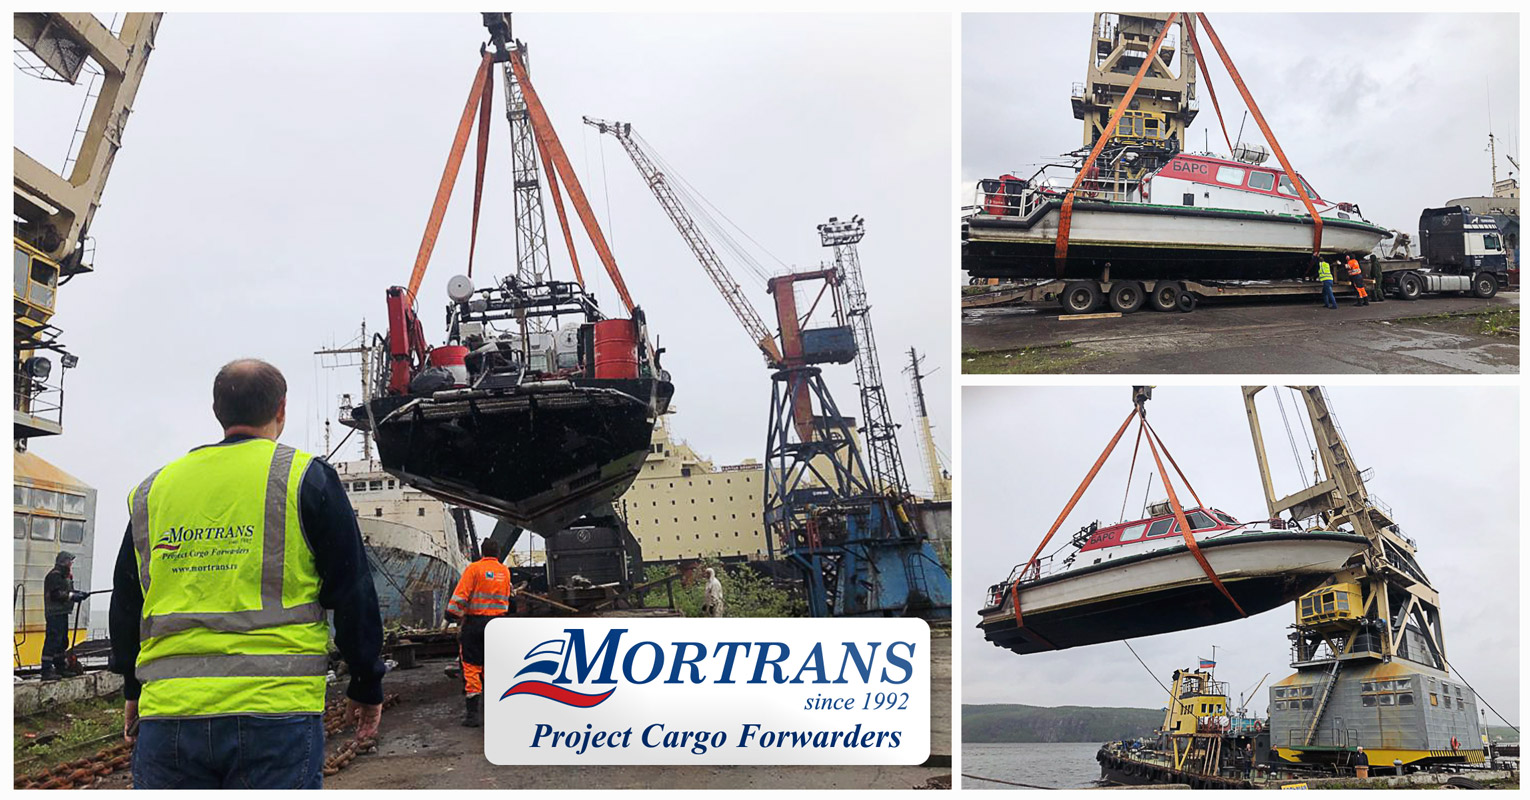 Mortrans Ltd. Russia Performed a Project Shipment from Murmansk Port to Yamburg Port (both in the Arctic area of North of Russia)